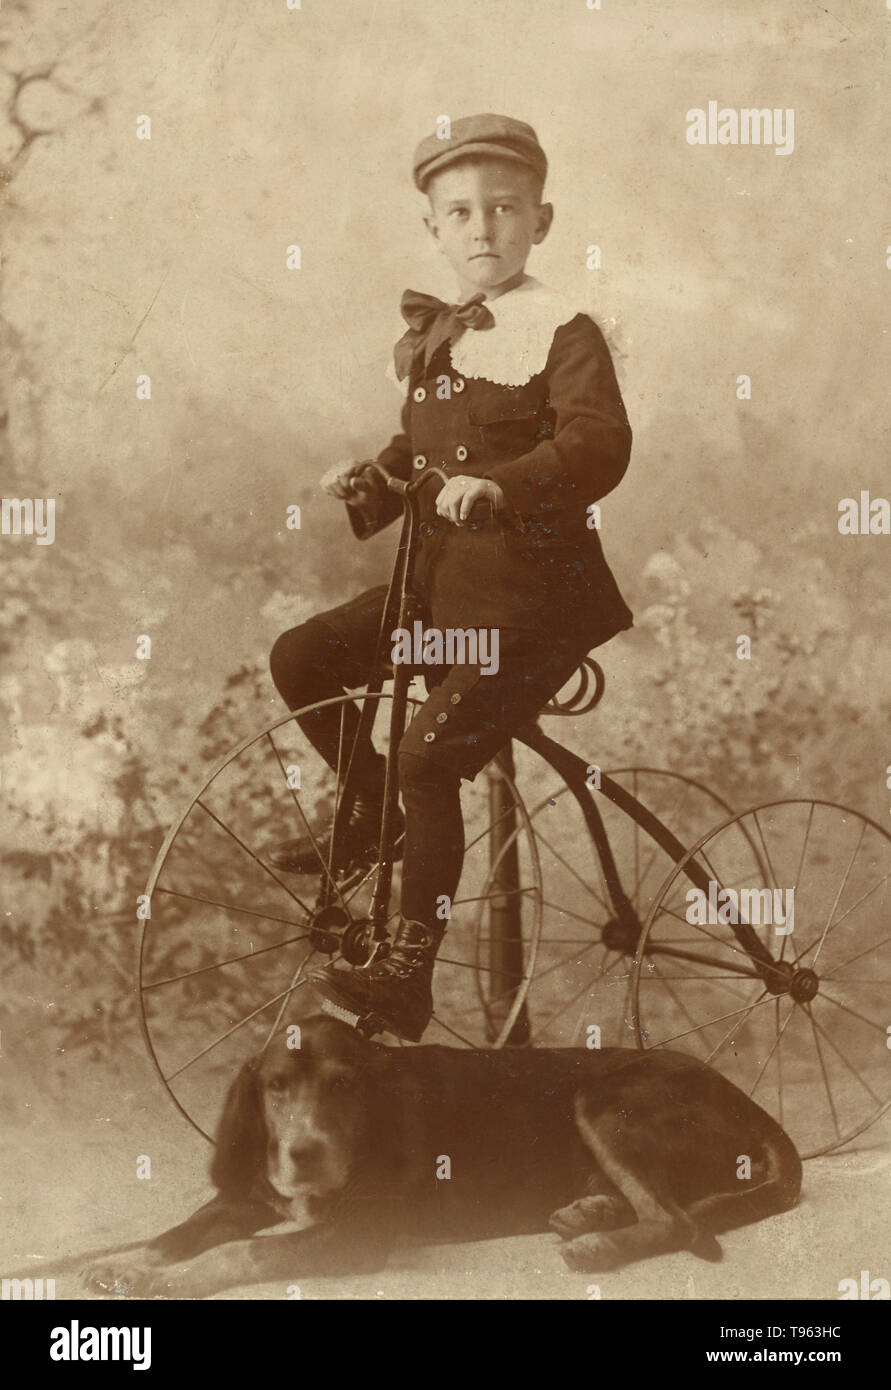 Boy wearing a cap, mounted on an old-style three-wheel bicycle, with a dog in the foreground, 1890s. Taken by J. Henry Davis, American. Stock Photo